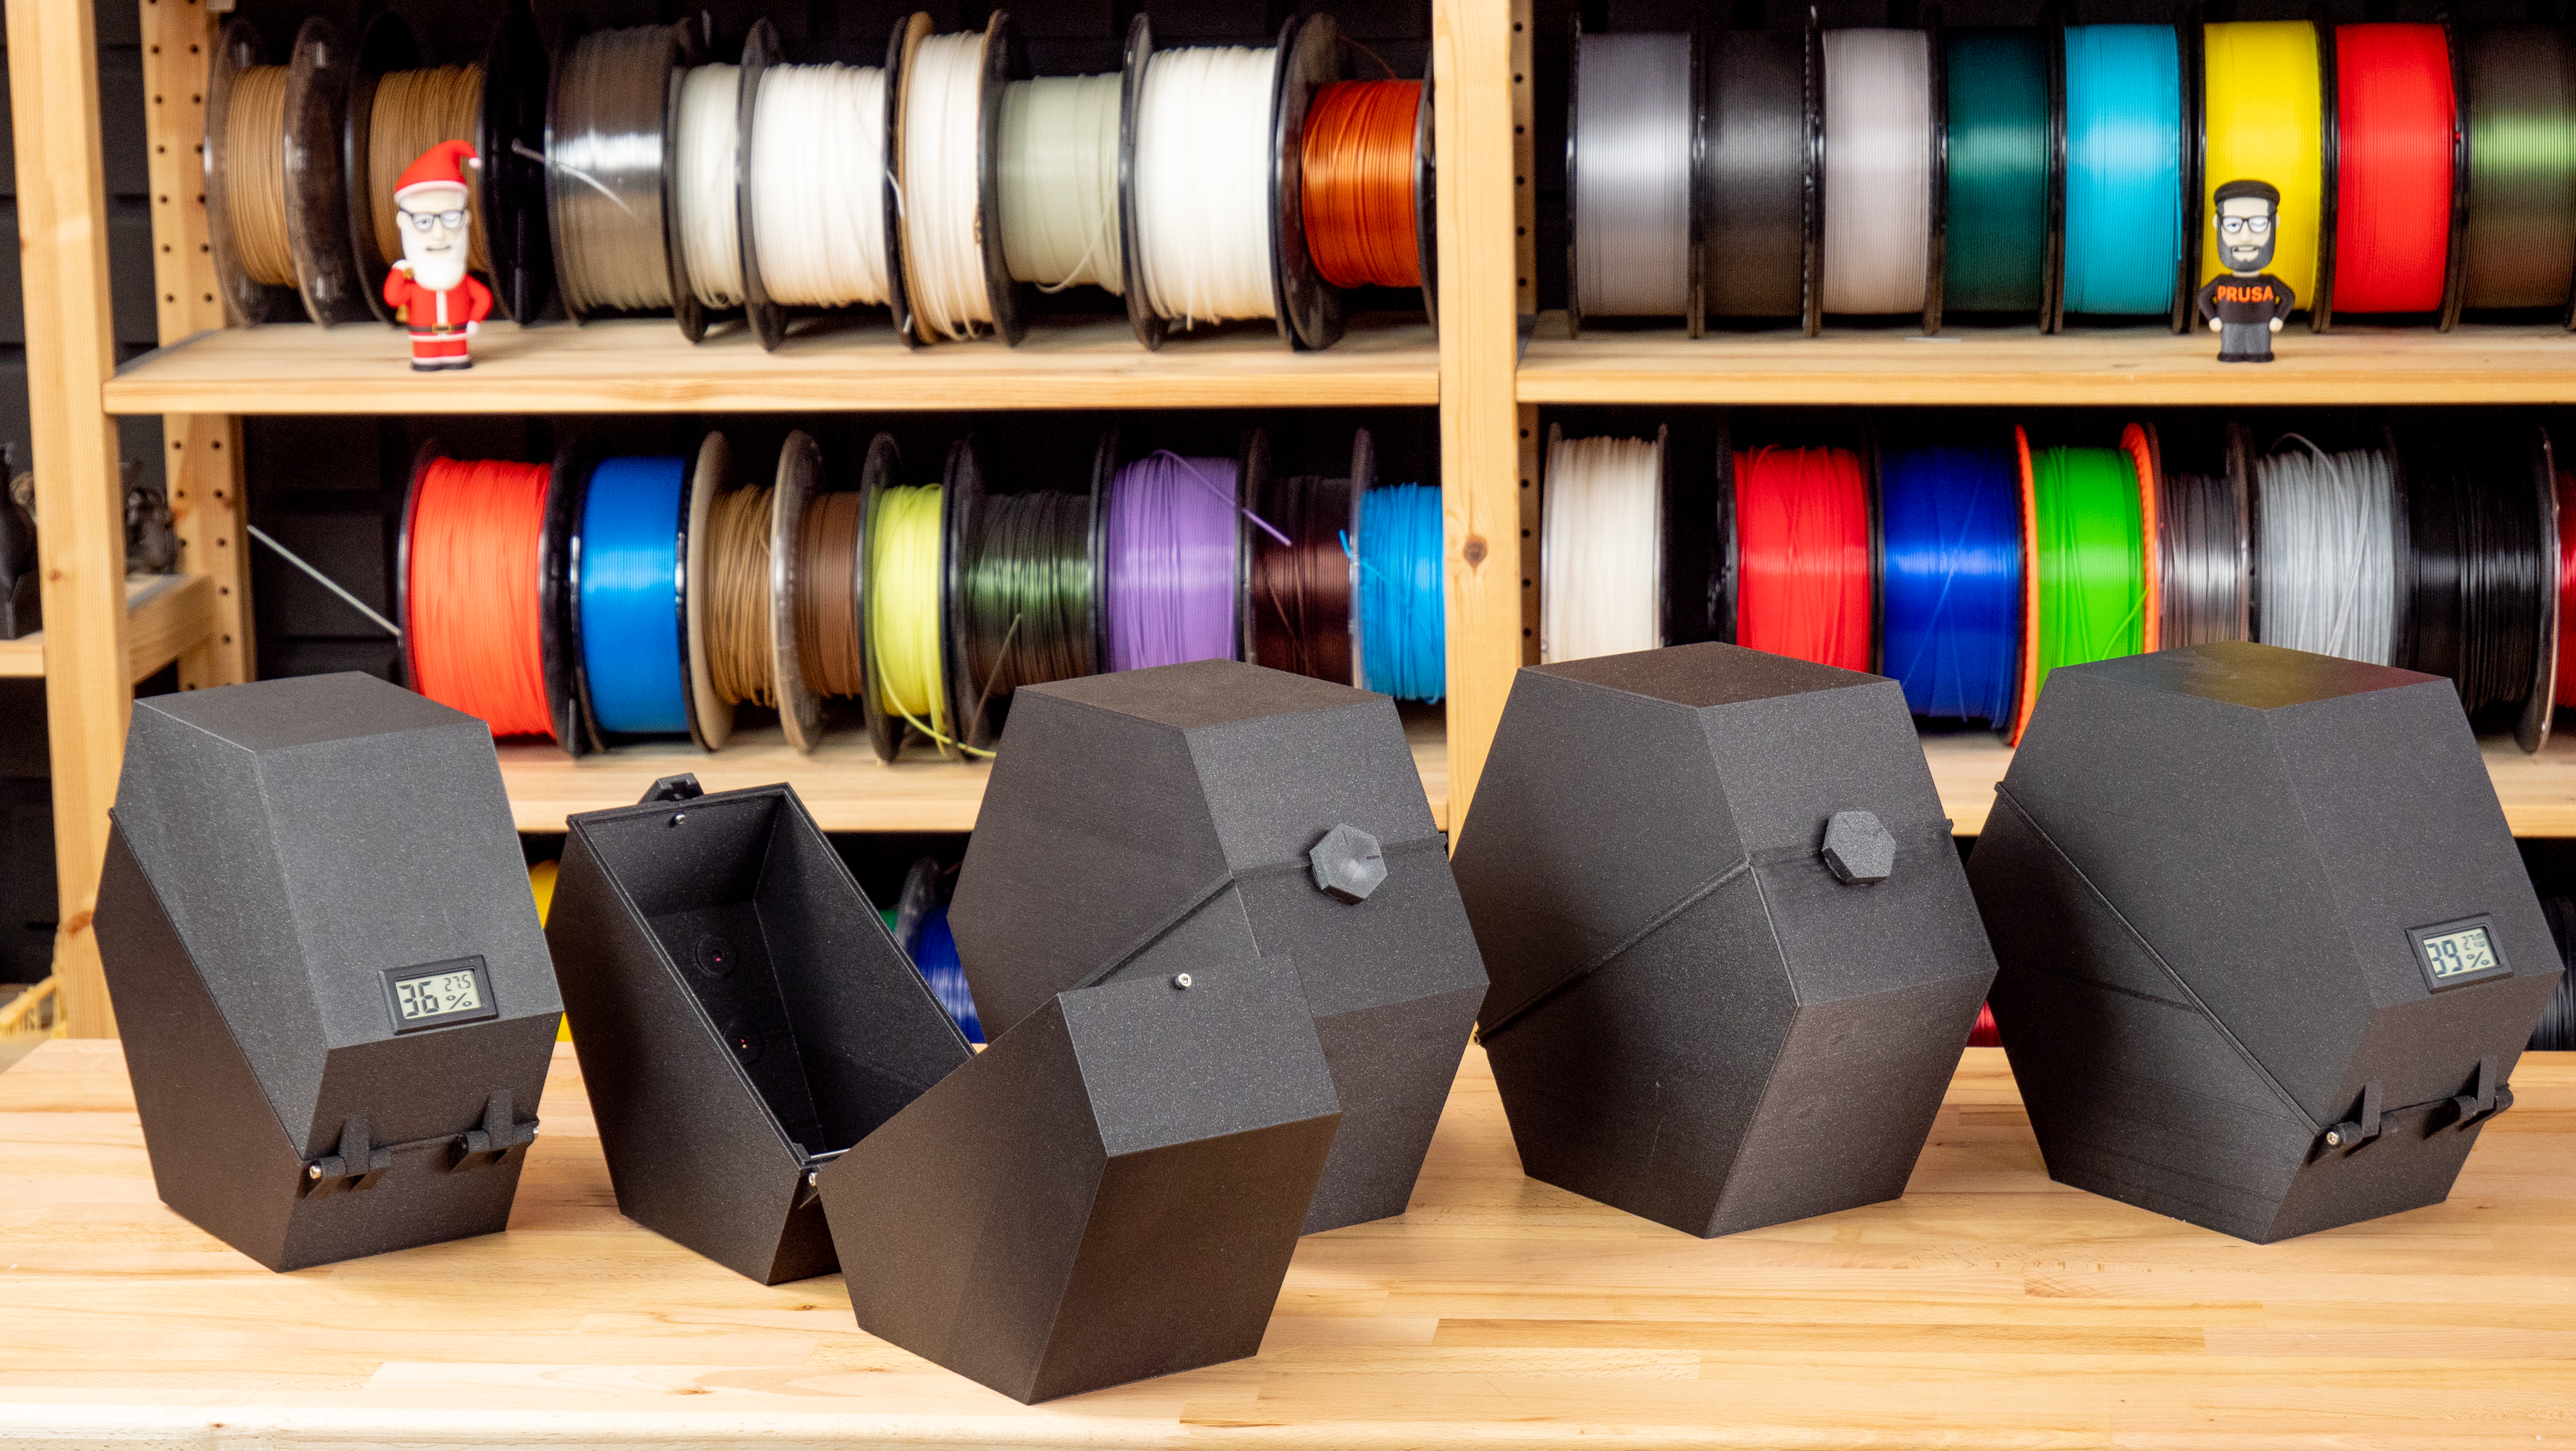 Filament dryboxes and alternative spool holders - only for MMU2S - Original Prusa 3D Printers